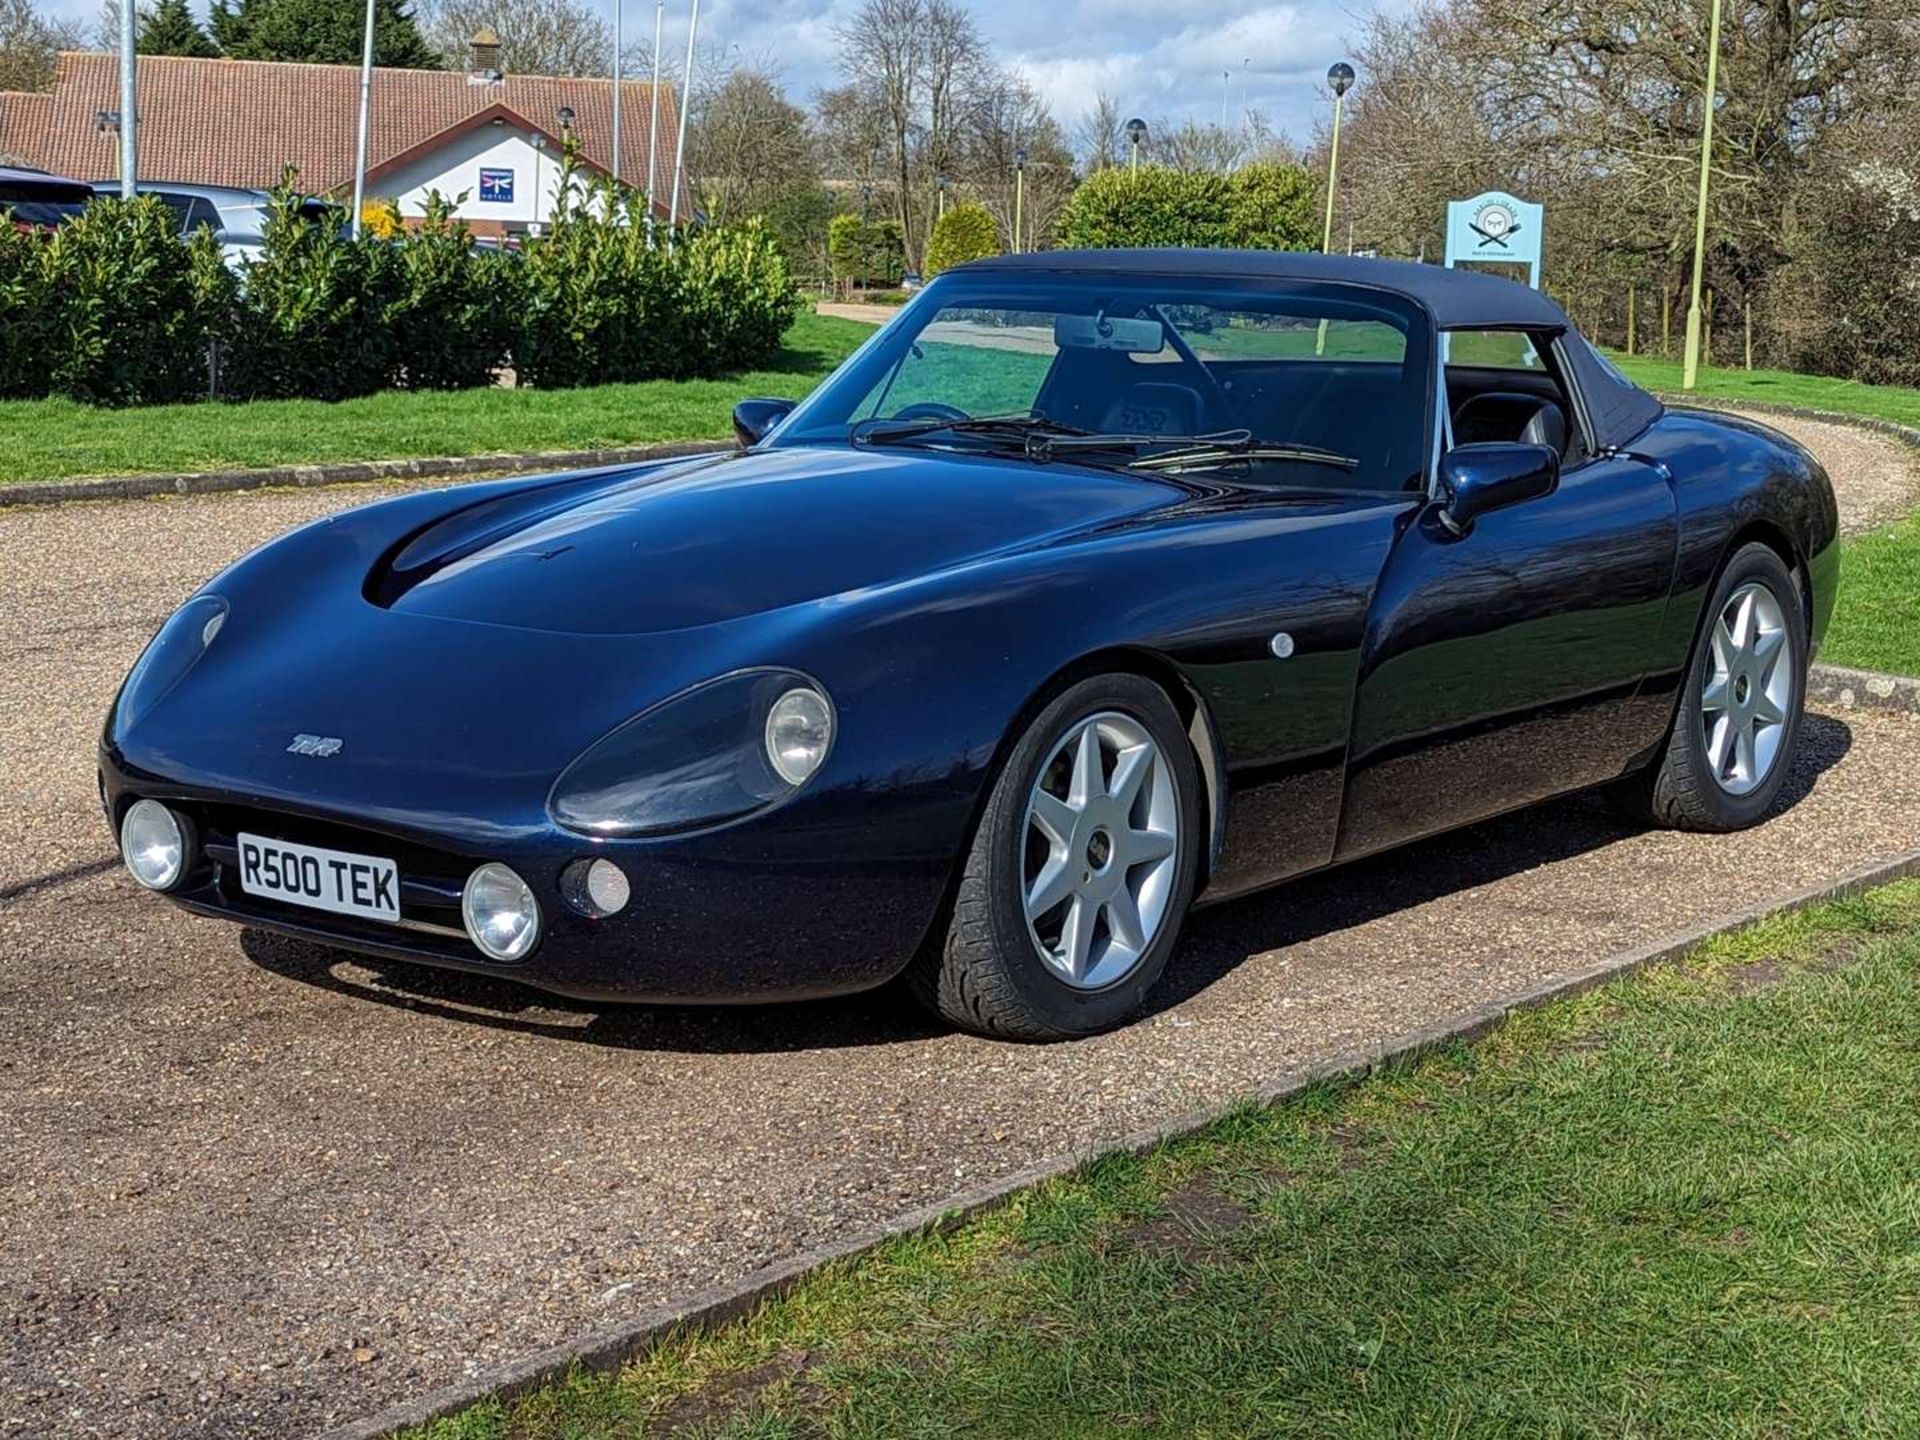 1997 TVR GRIFFITH 5.0 - Image 4 of 29